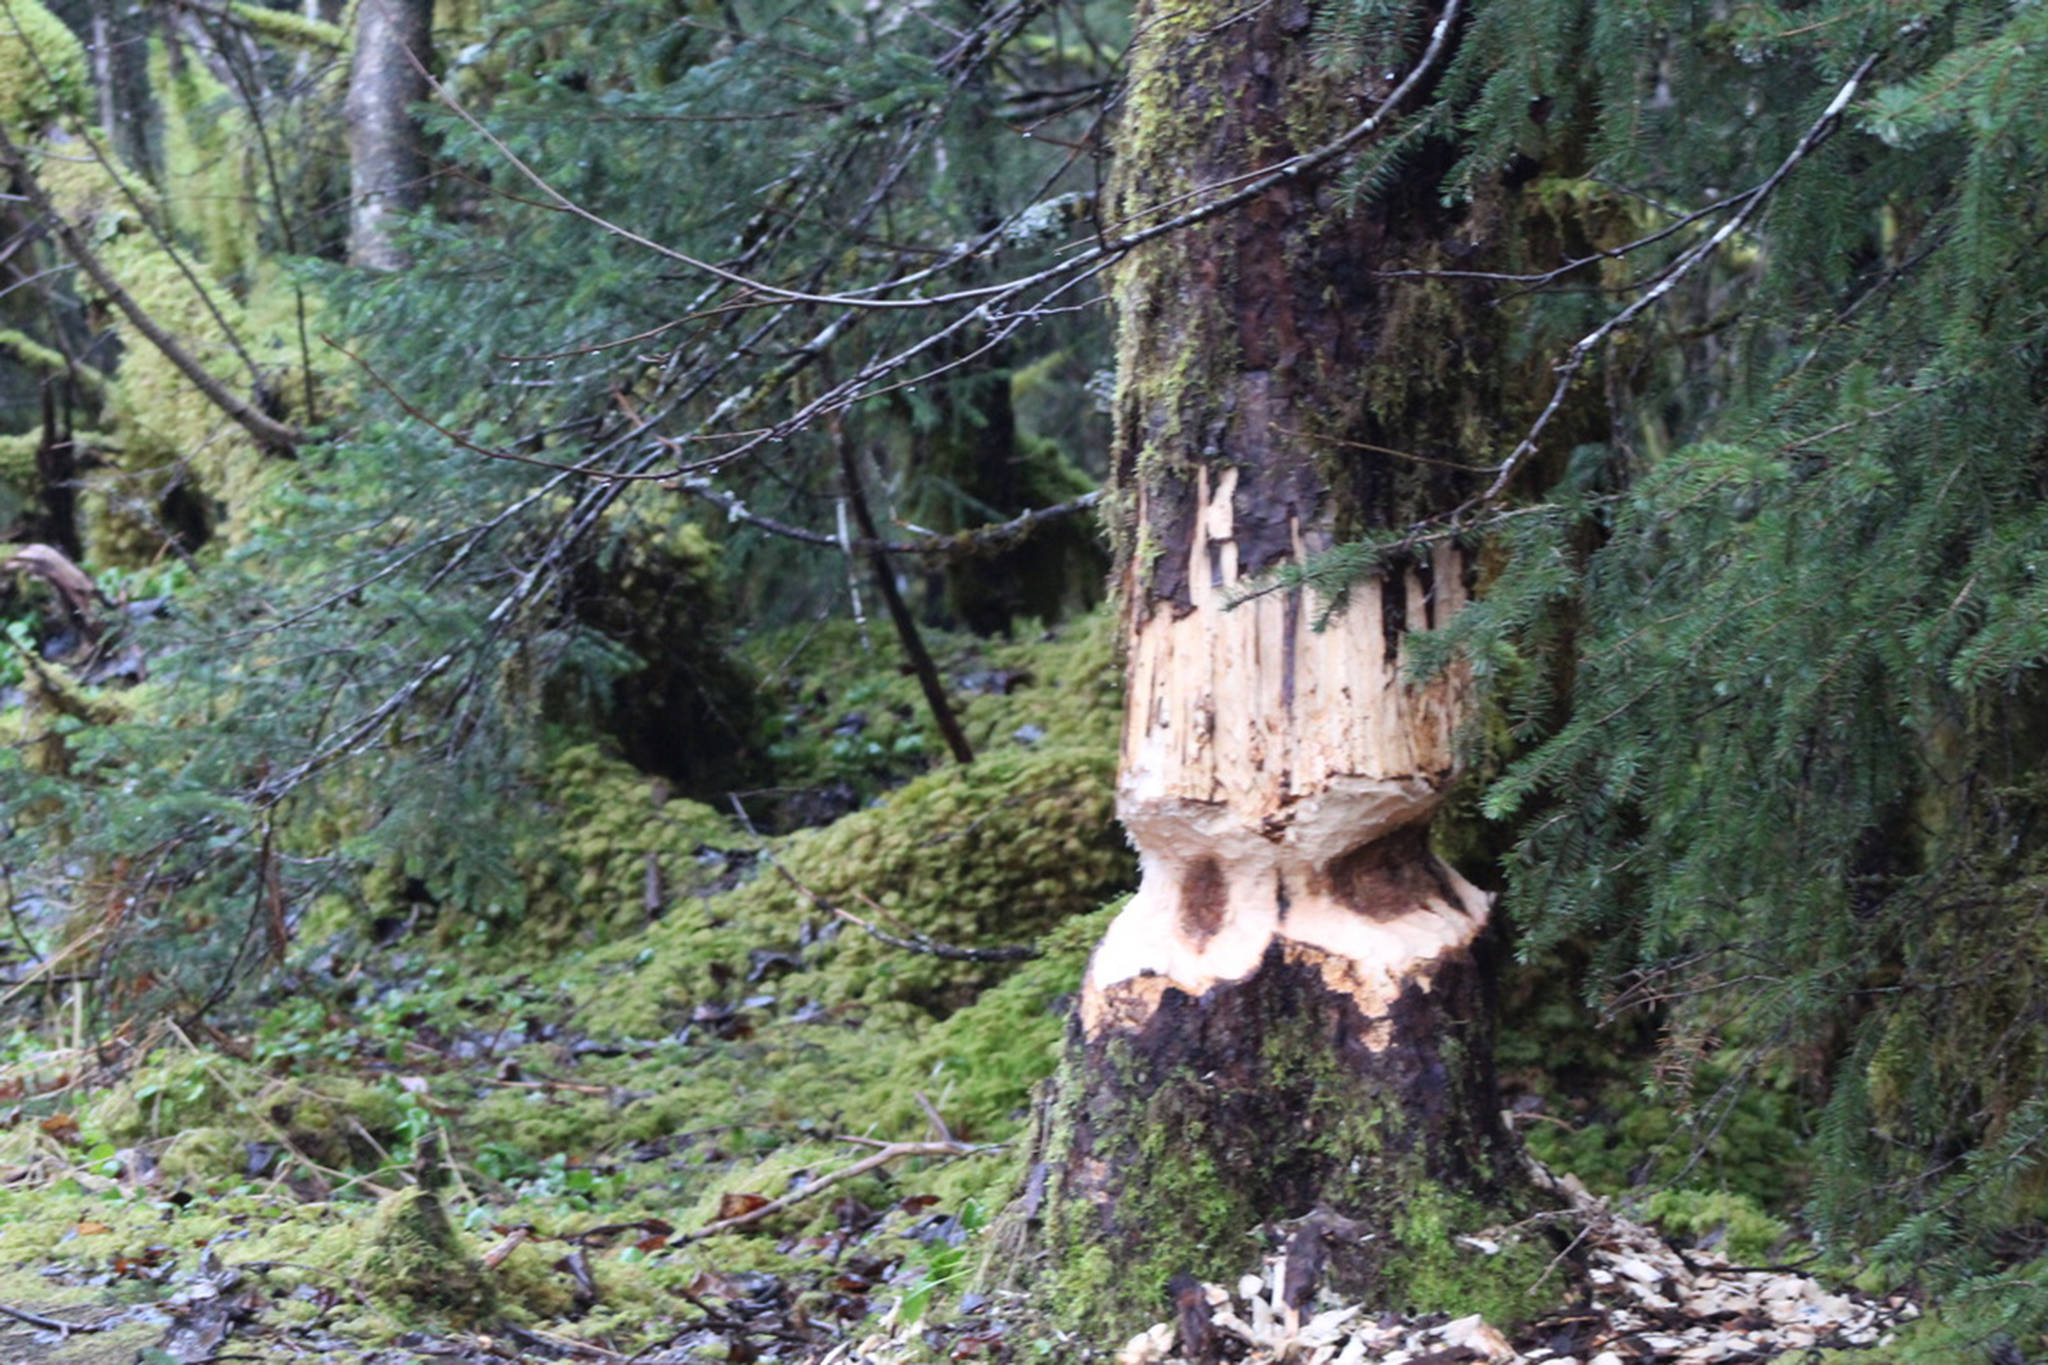 This tree was seen on the Moraine Ecology Trail near the Mendenhall Glacier on Jan. 18. (Courtesy Photo / Carolyn Kelley)